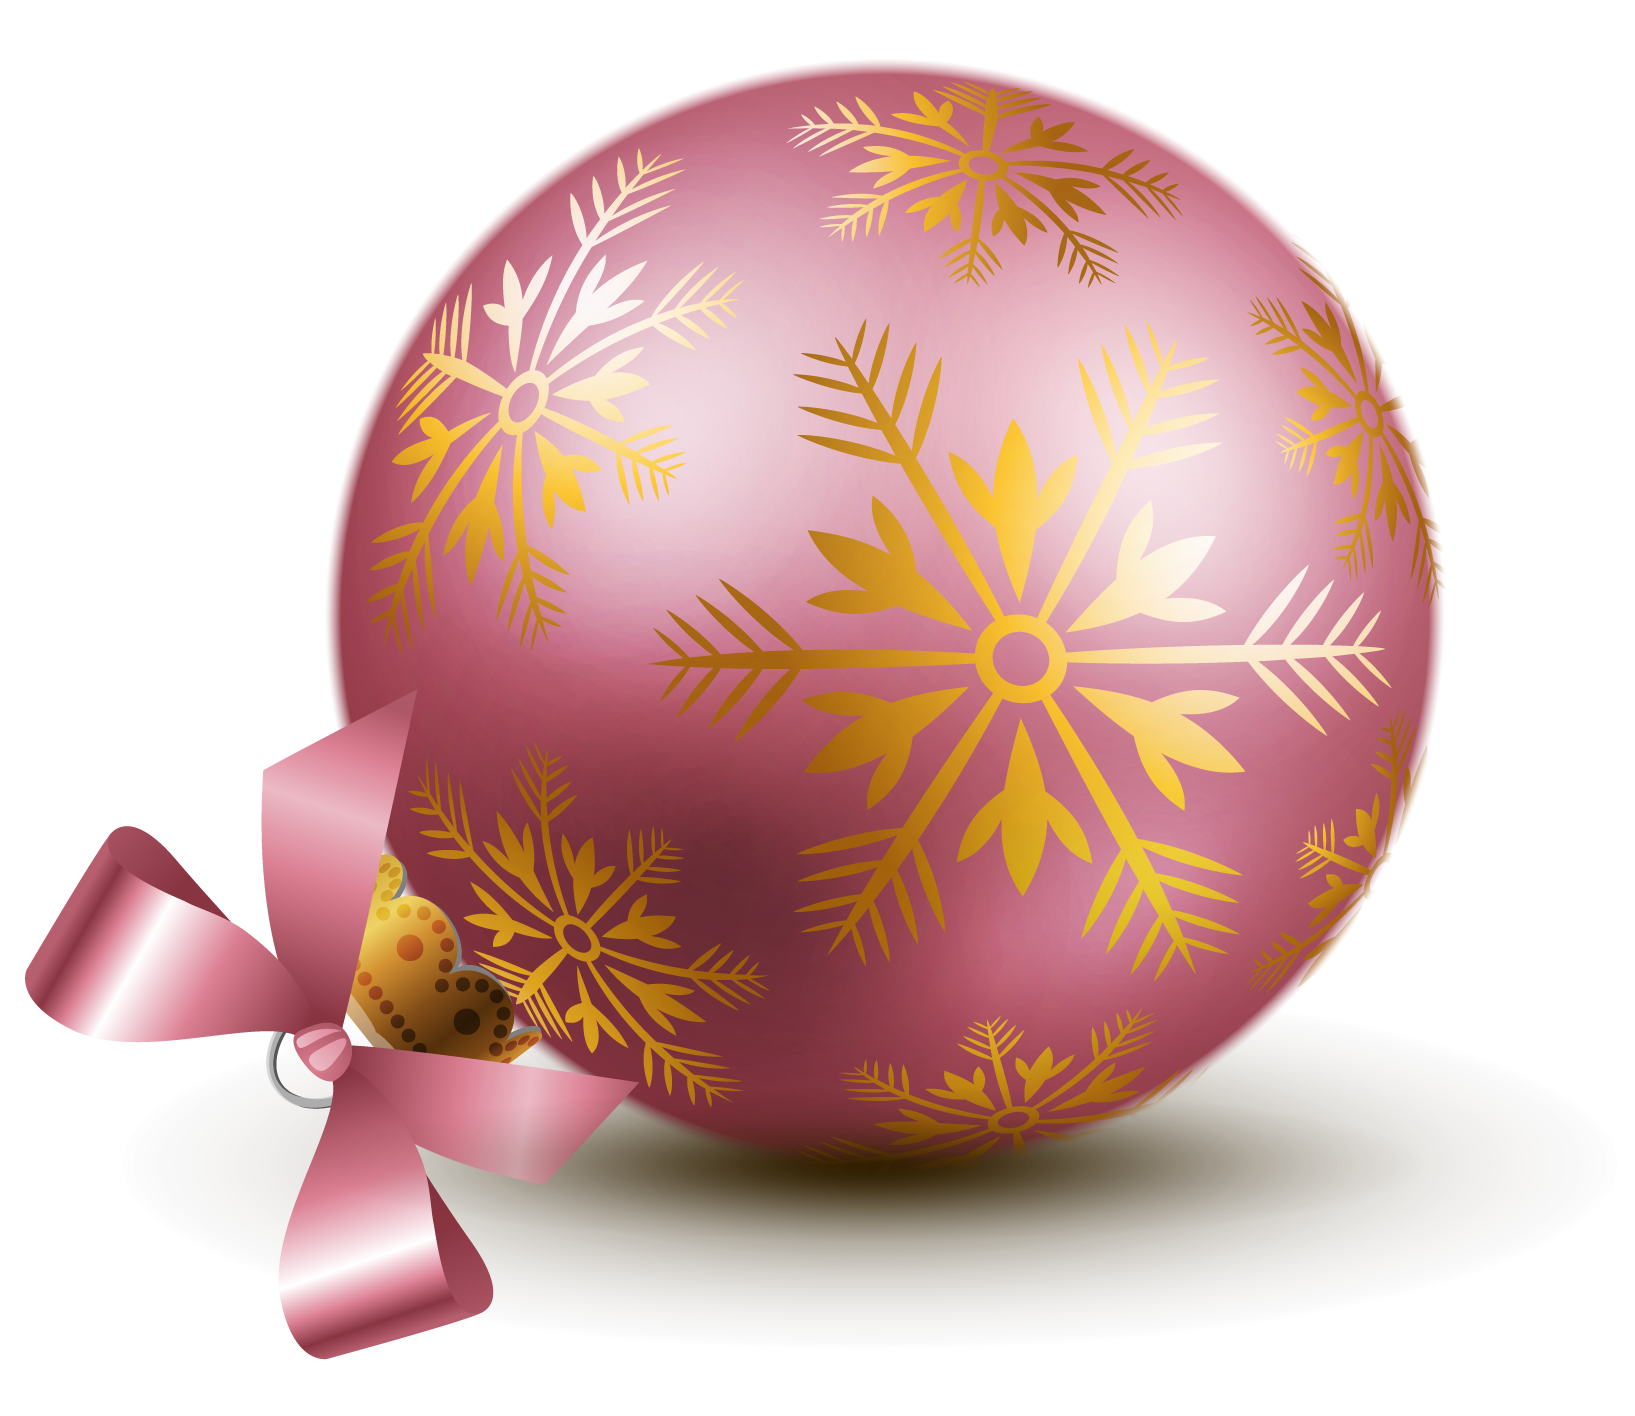 Purple Christmas Ornaments HQ Image Free PNG Image